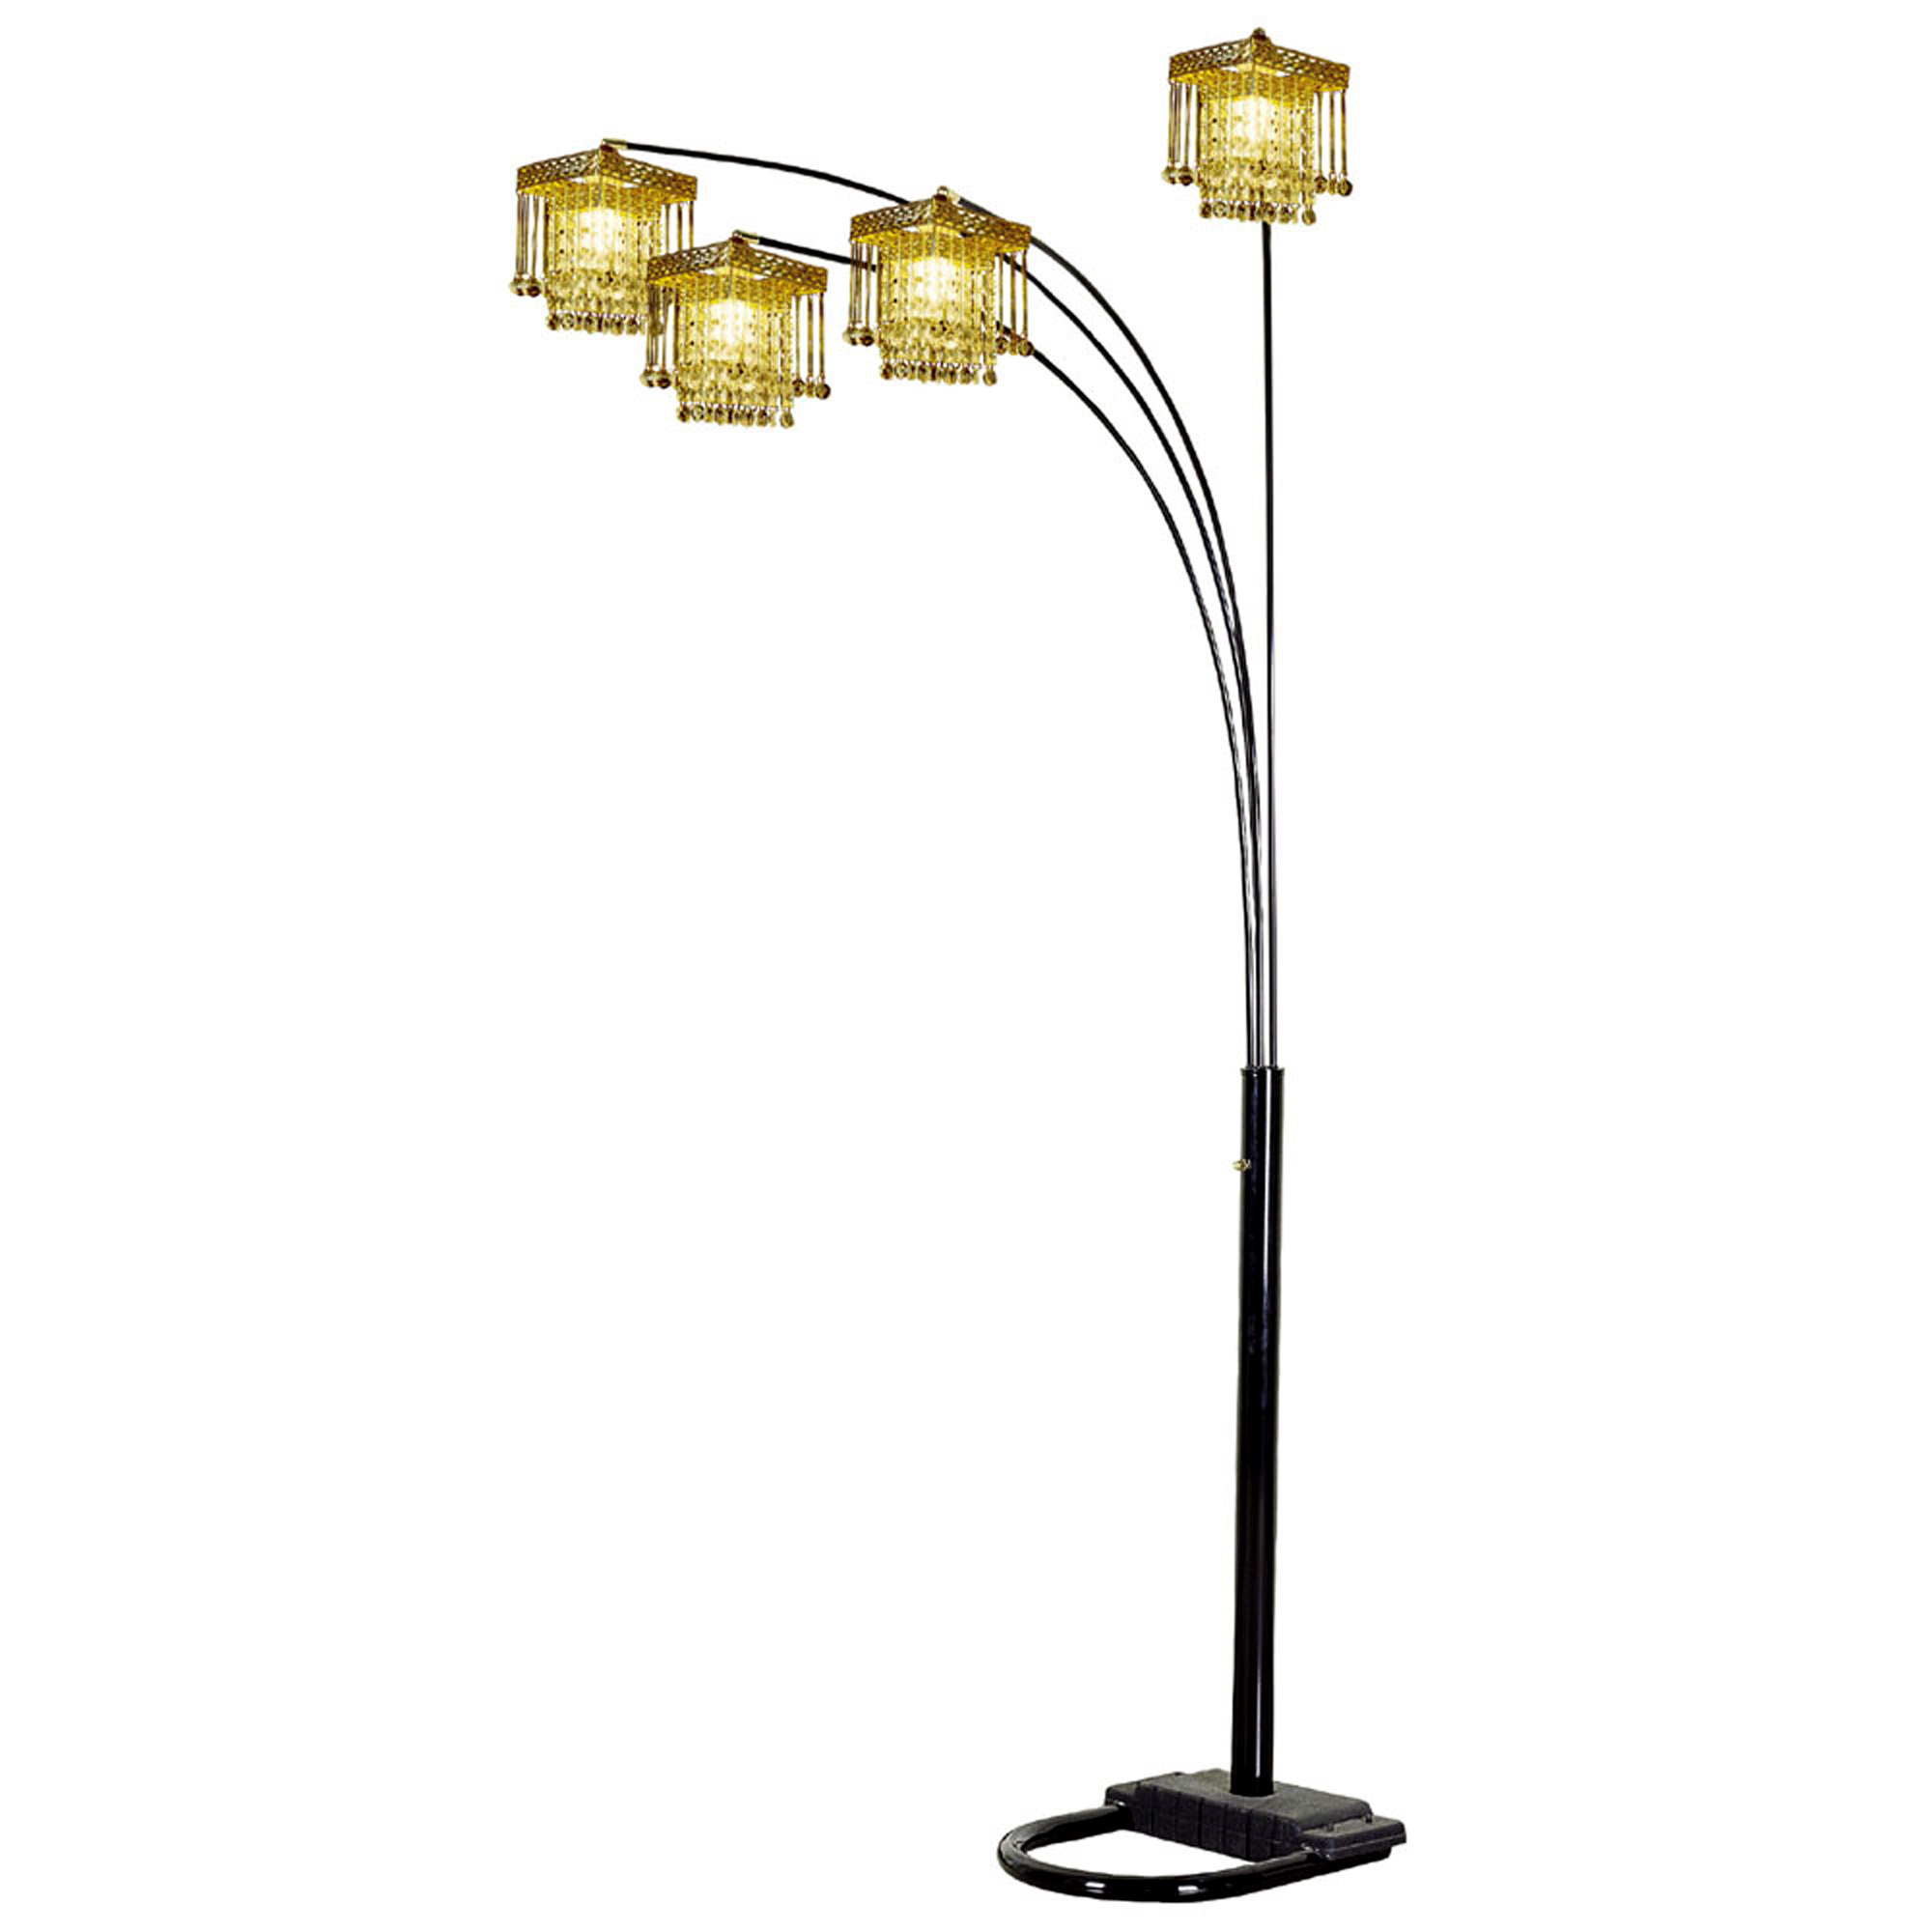 Details About Ore International 84 Inch 5 Arms Arch Floor Lamp Black 6968bk in dimensions 2000 X 2000